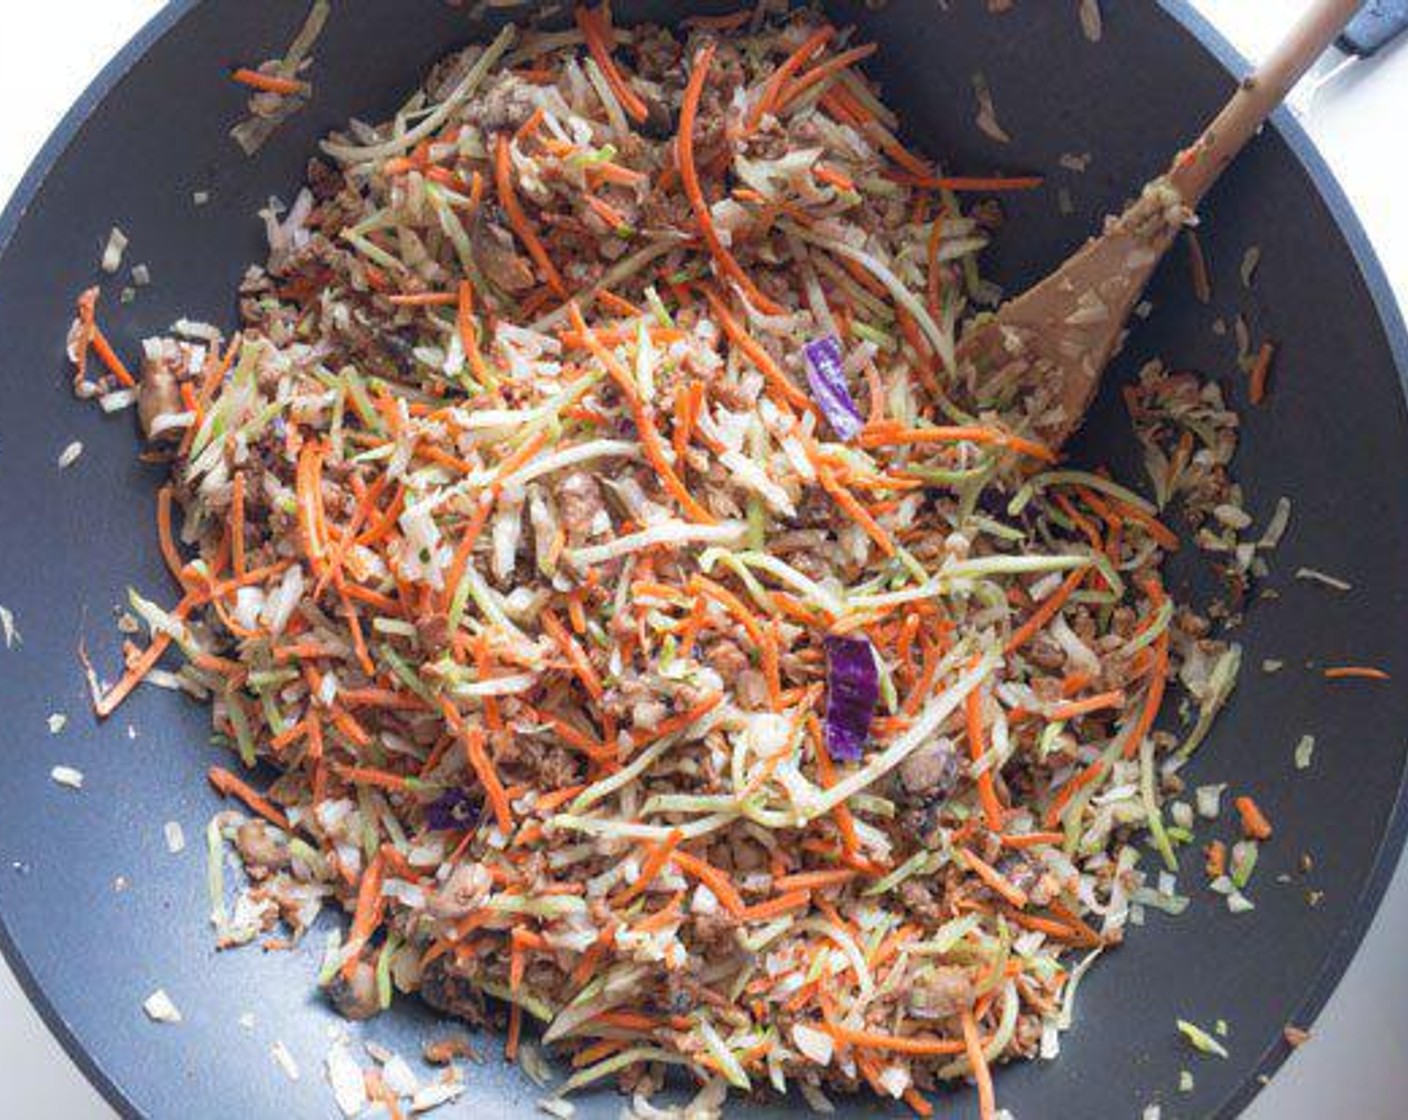 step 2 Add Green Cabbage (1 pckg), Carrot (1/2 pckg) and Broccoli Slaw (1 pckg), Soy Sauce (2 Tbsp) or teriyaki sauce and Toasted Sesame Oil (1 Tbsp) and stir. Add more oil if needed. Cover and cook for a couple minutes.